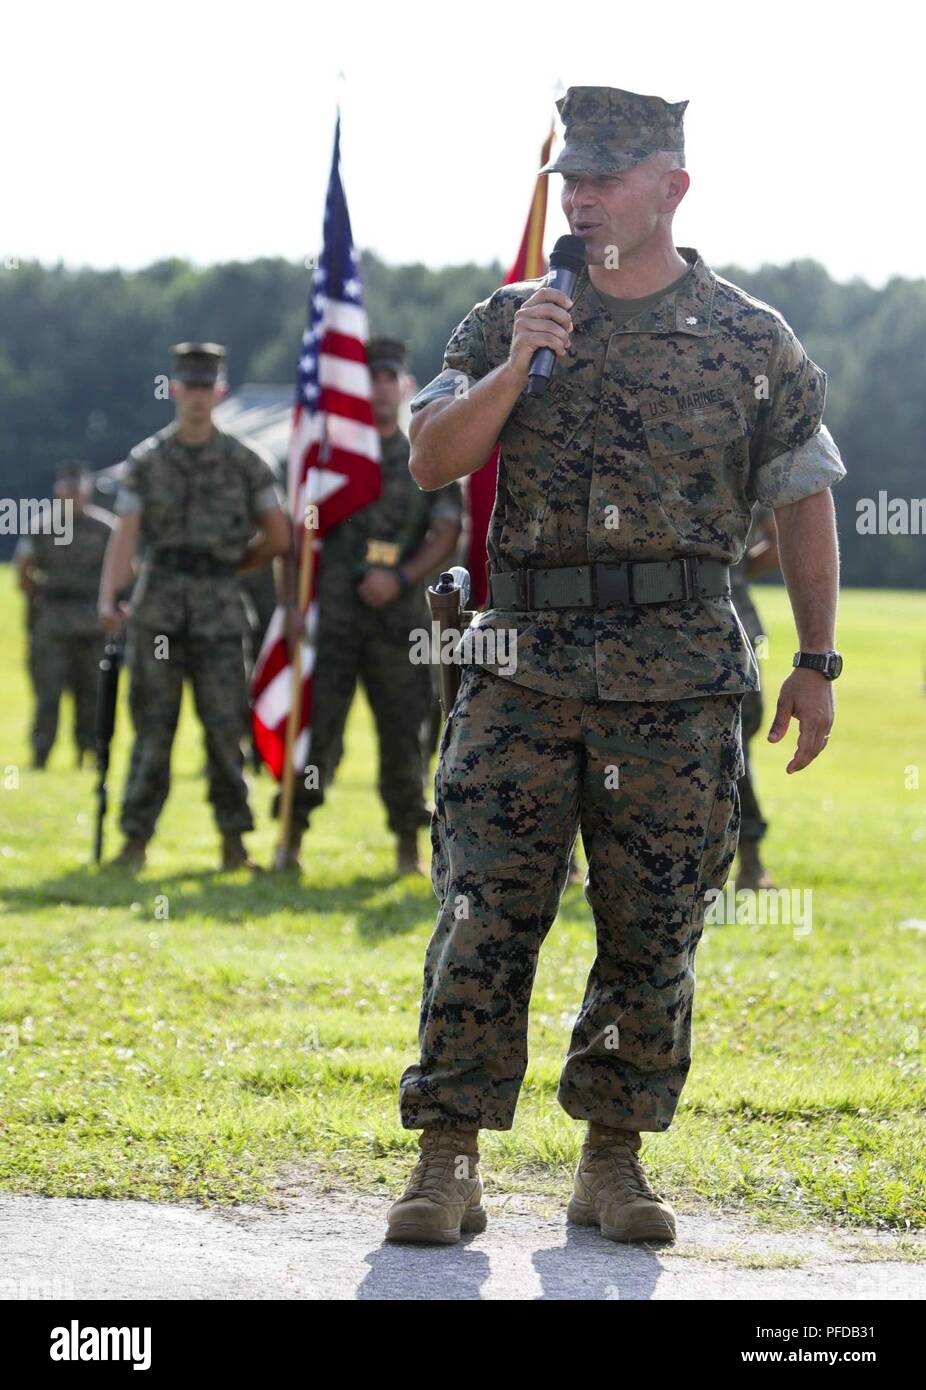 U.S. Marine Corps Lt. Col. Kyle G. Phillips, the off going commanding officer of Headquarters and Service (H&S) Battalion, School of Infantry-East, addresses Marines, sailors, family and friends during the H&S Battalion change of command ceremony at Camp Lejeune, N.C., June 8, 2018. The change of command ceremony represents the offical passing of authority from the off going commander, Lt. Col. Phillips to the on coming, Lt. Col. Amy E. Punzel. Stock Photo